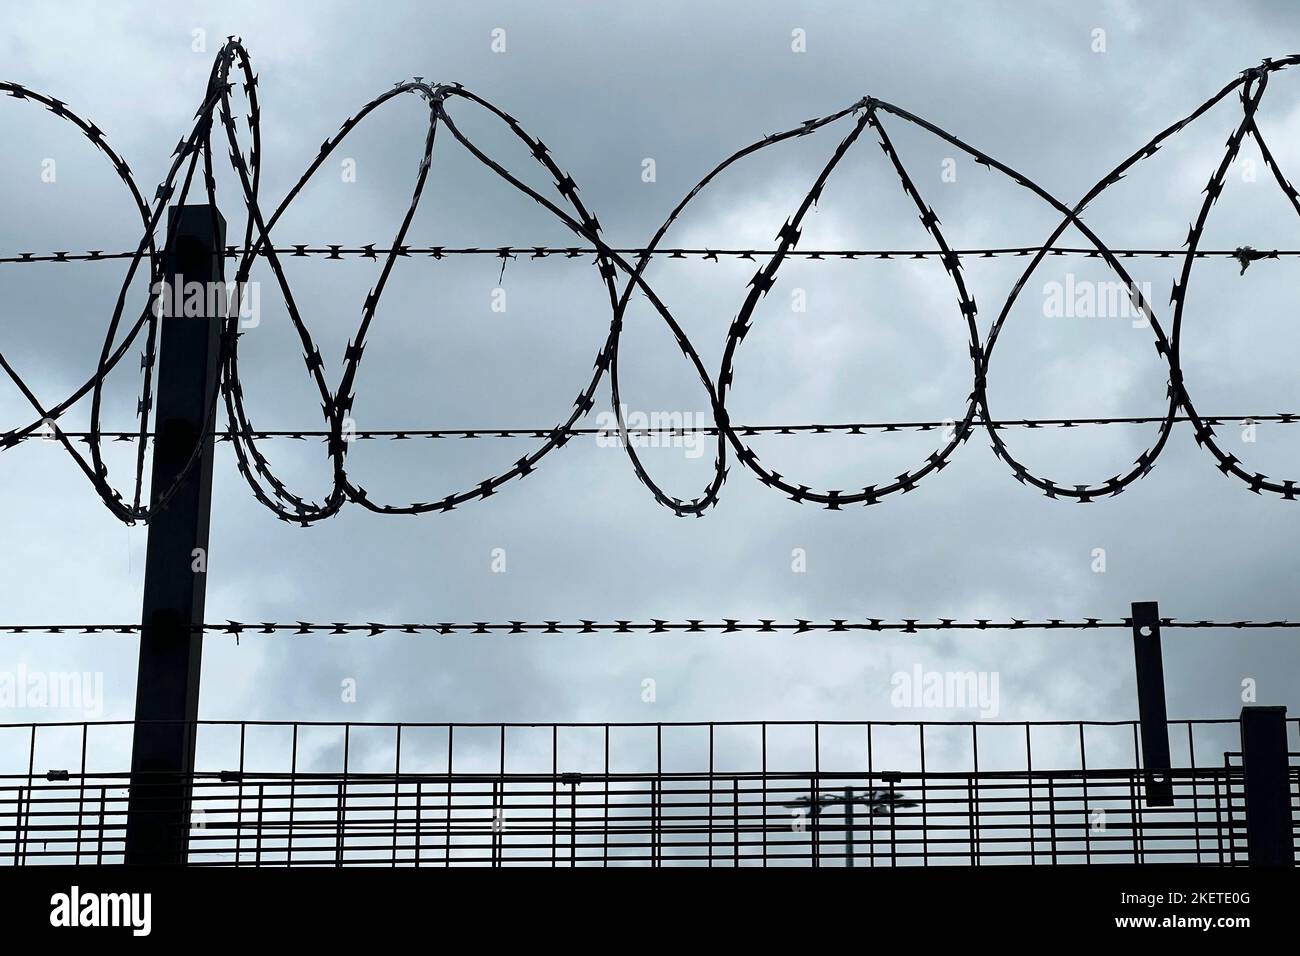 Security Concept With Razor Wire Fence And Camera Against Stormy Sky Stock Photo